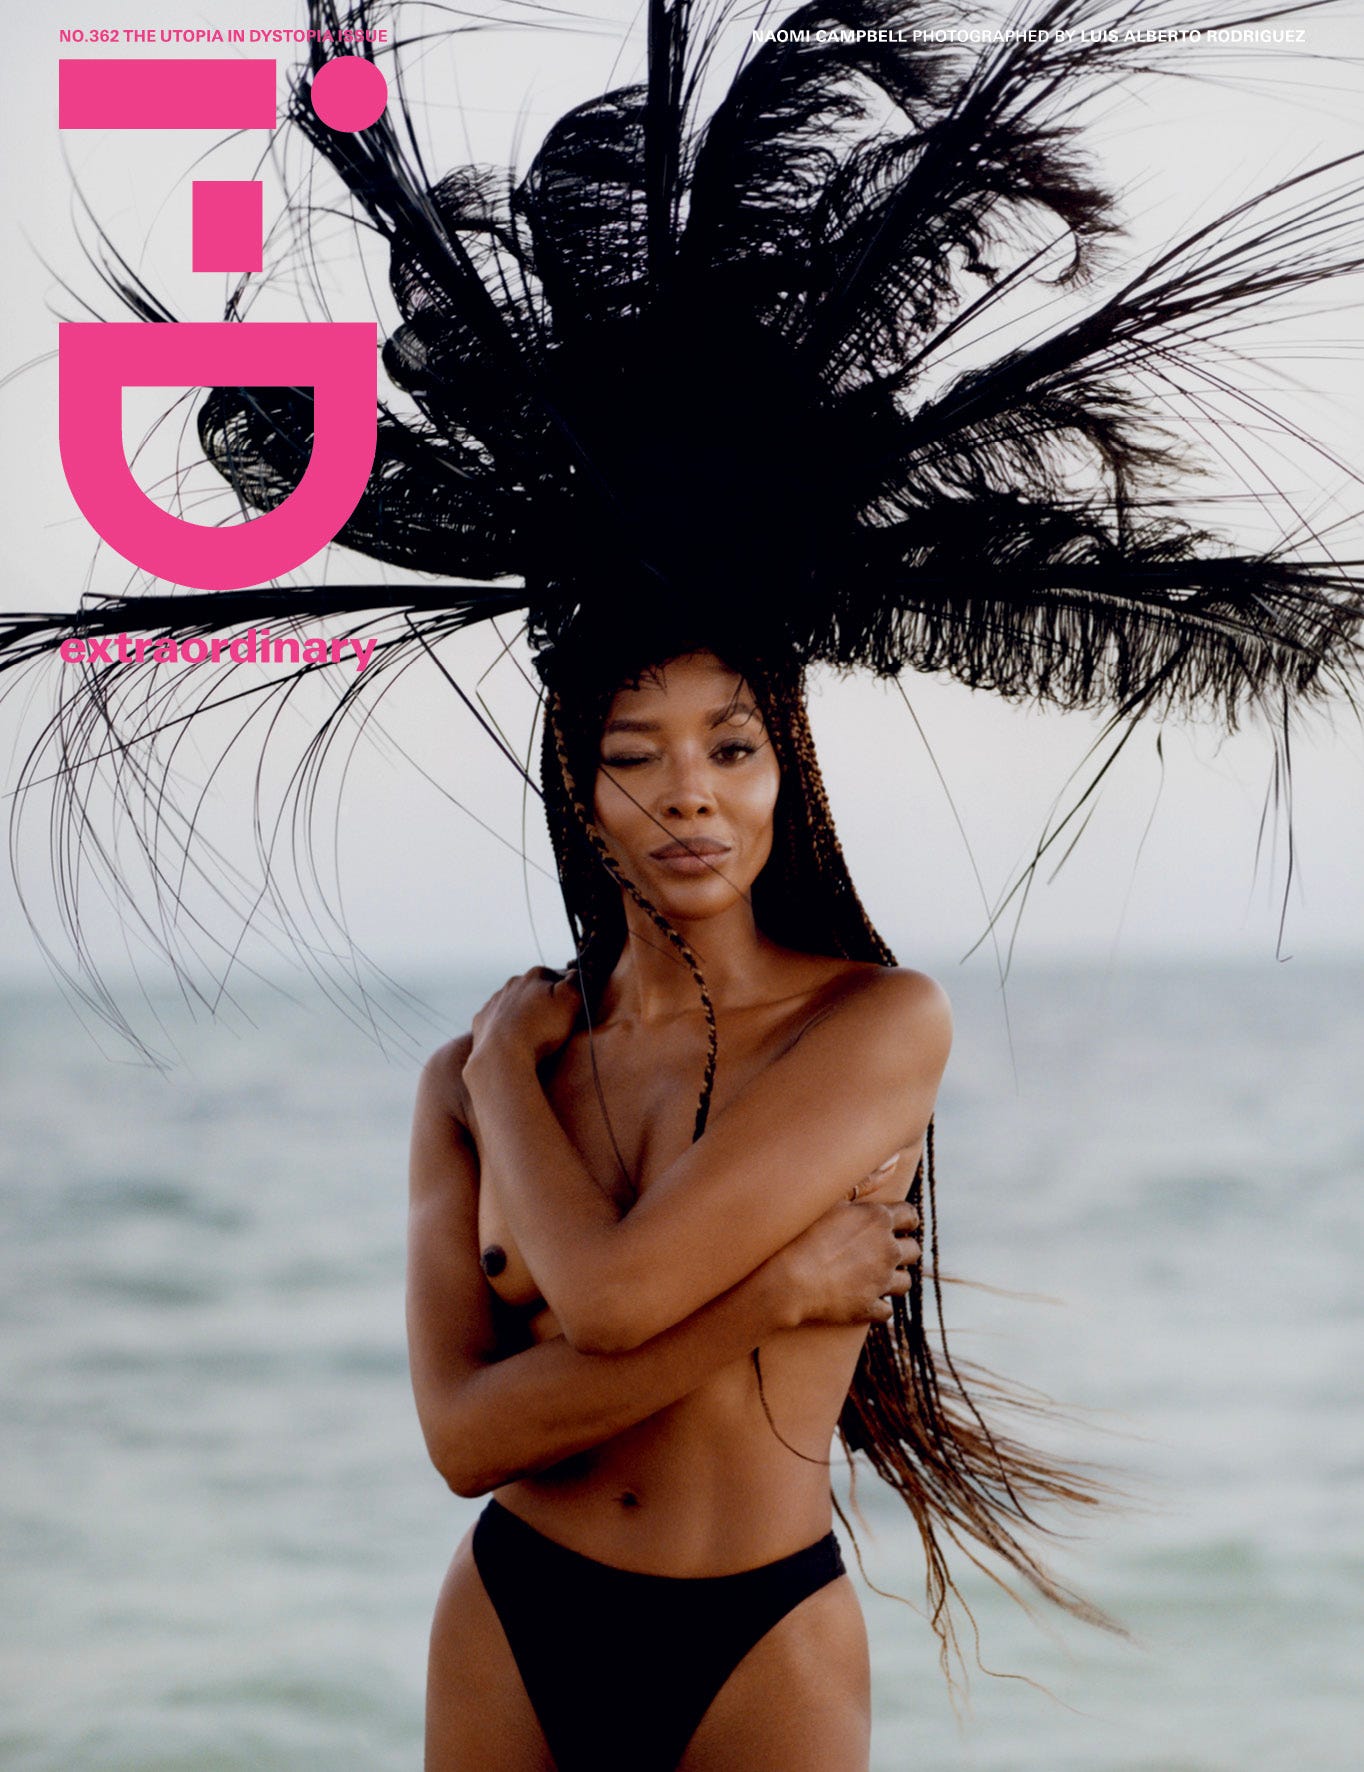 iD362_COVER_Naomi_Campbell_SPINE_26_01_21_1-LR.jpg